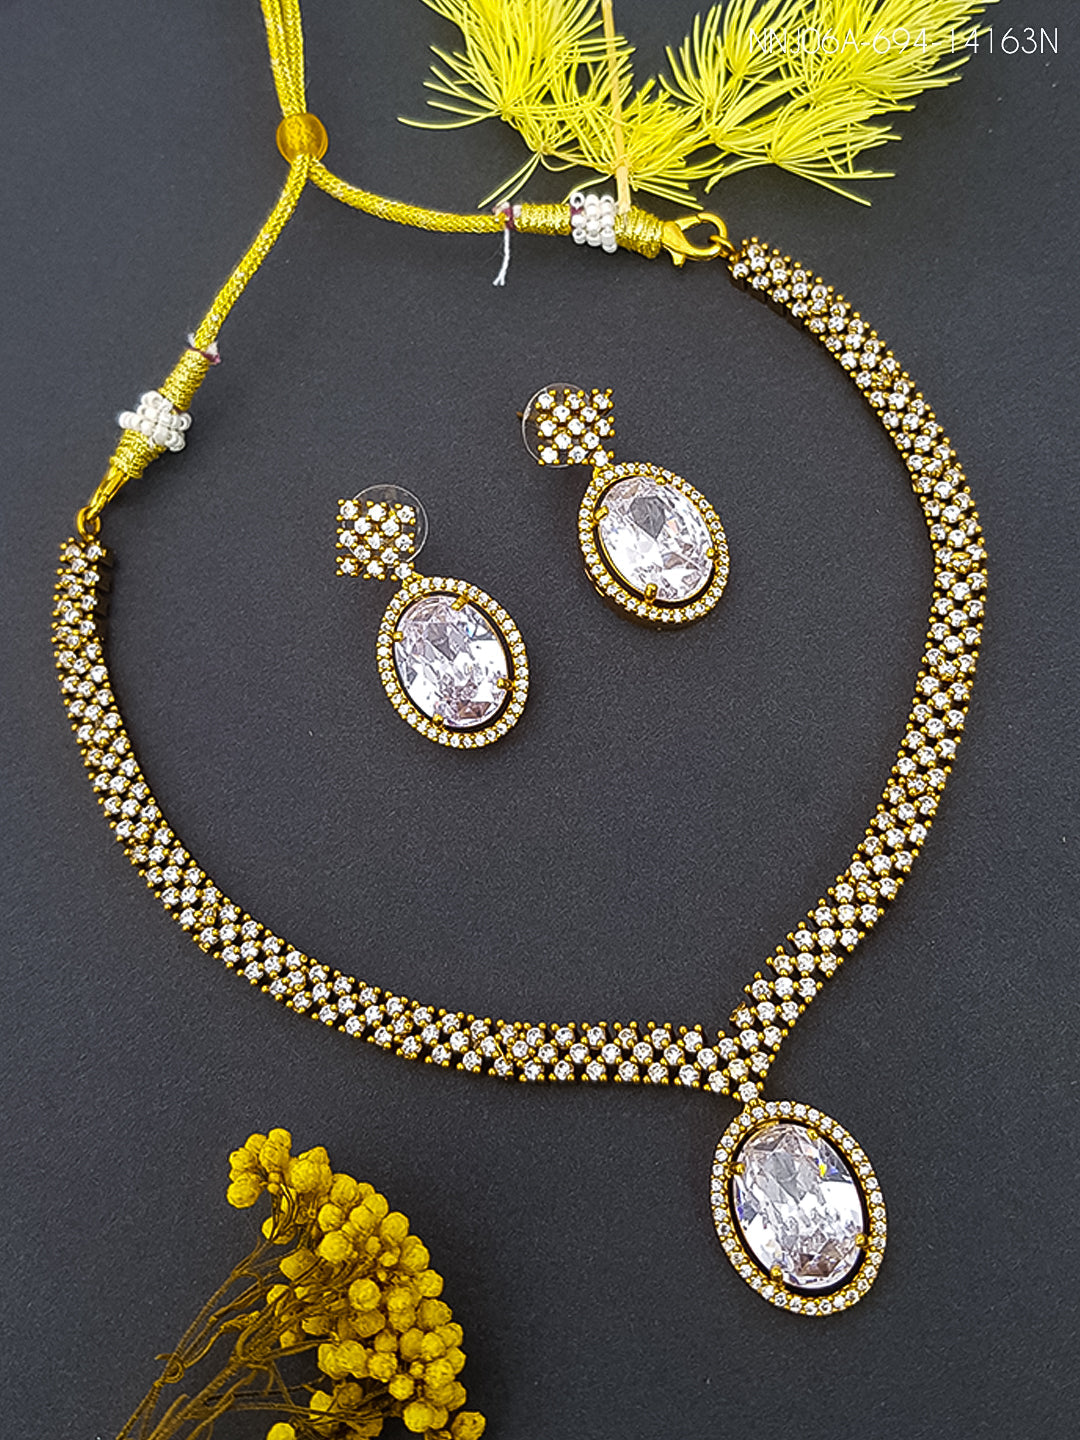 Gold Plated Drop CZ Necklace Set with monalisa stone 14162N